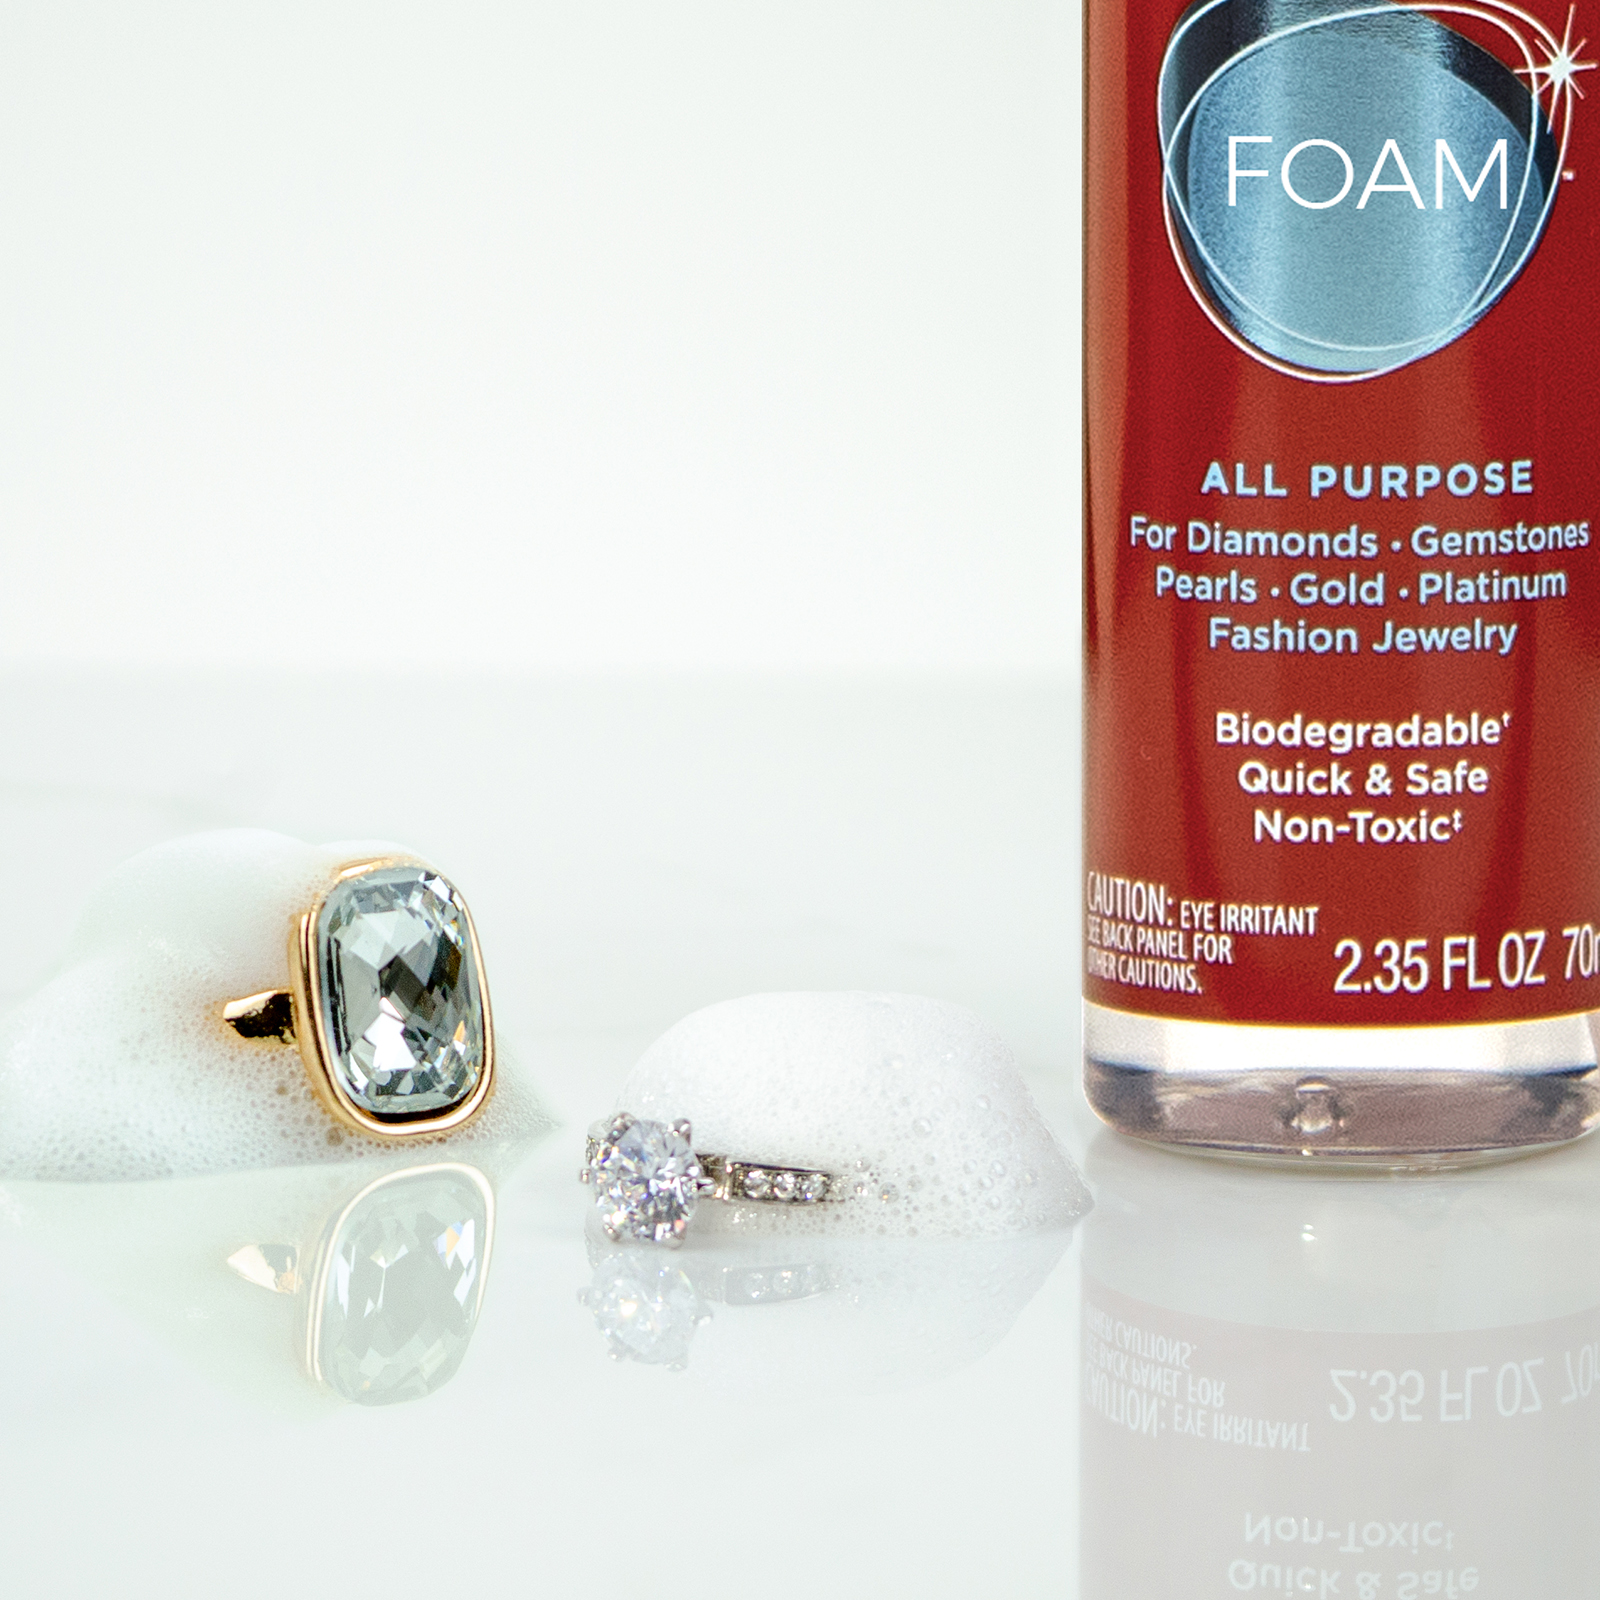 Connoisseurs All Purpose Jewelry Cleansing Foam